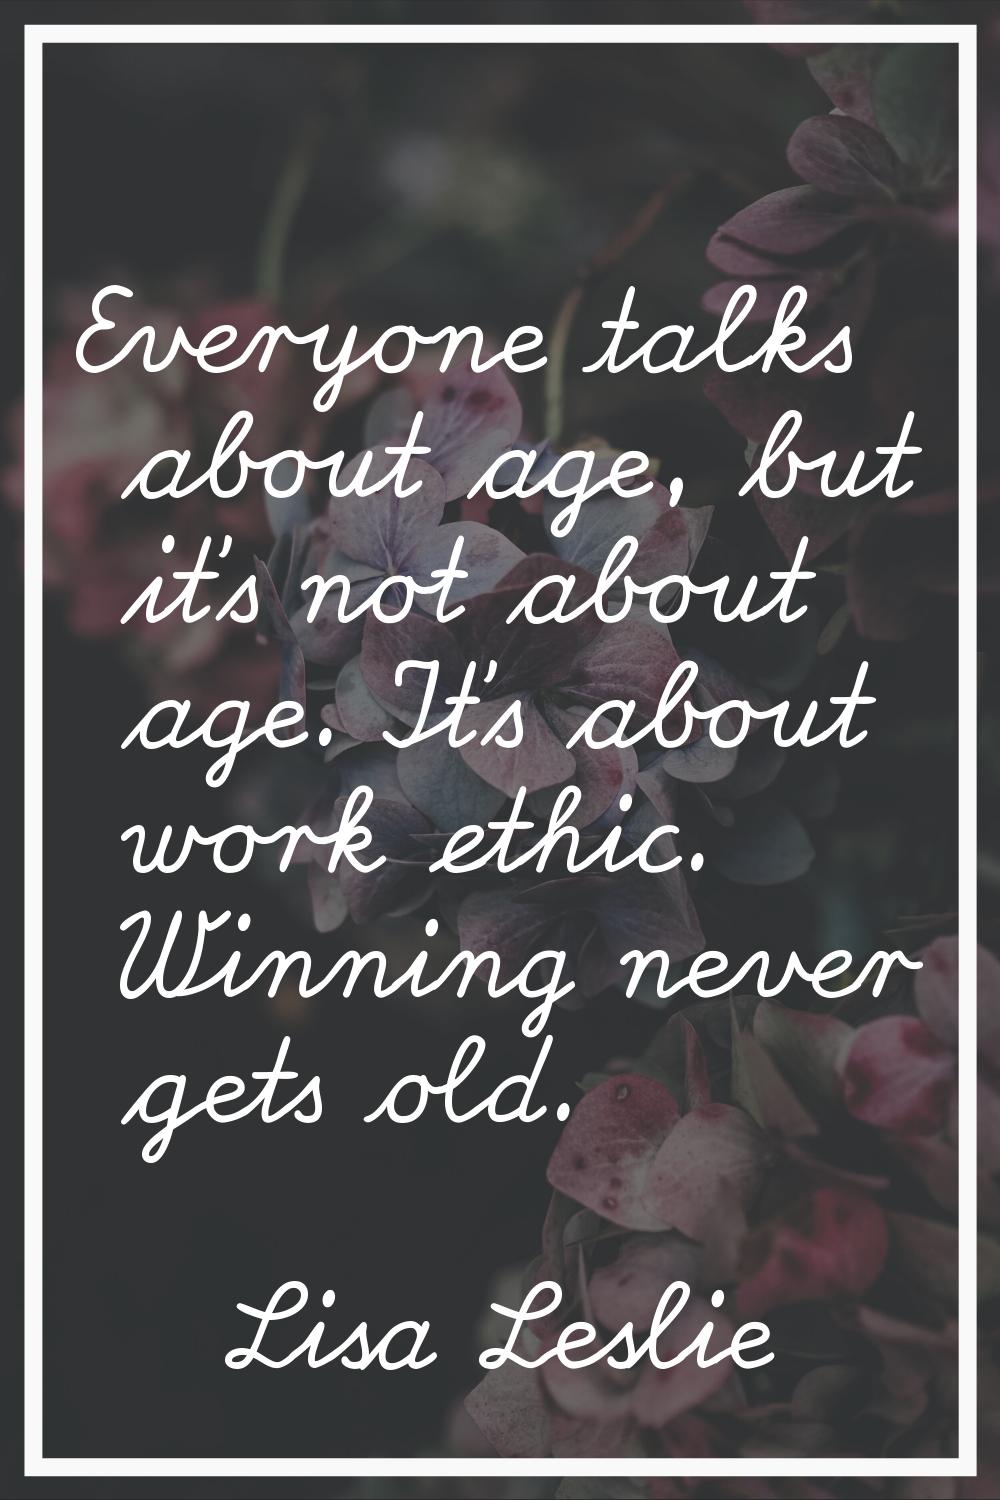 Everyone talks about age, but it's not about age. It's about work ethic. Winning never gets old.